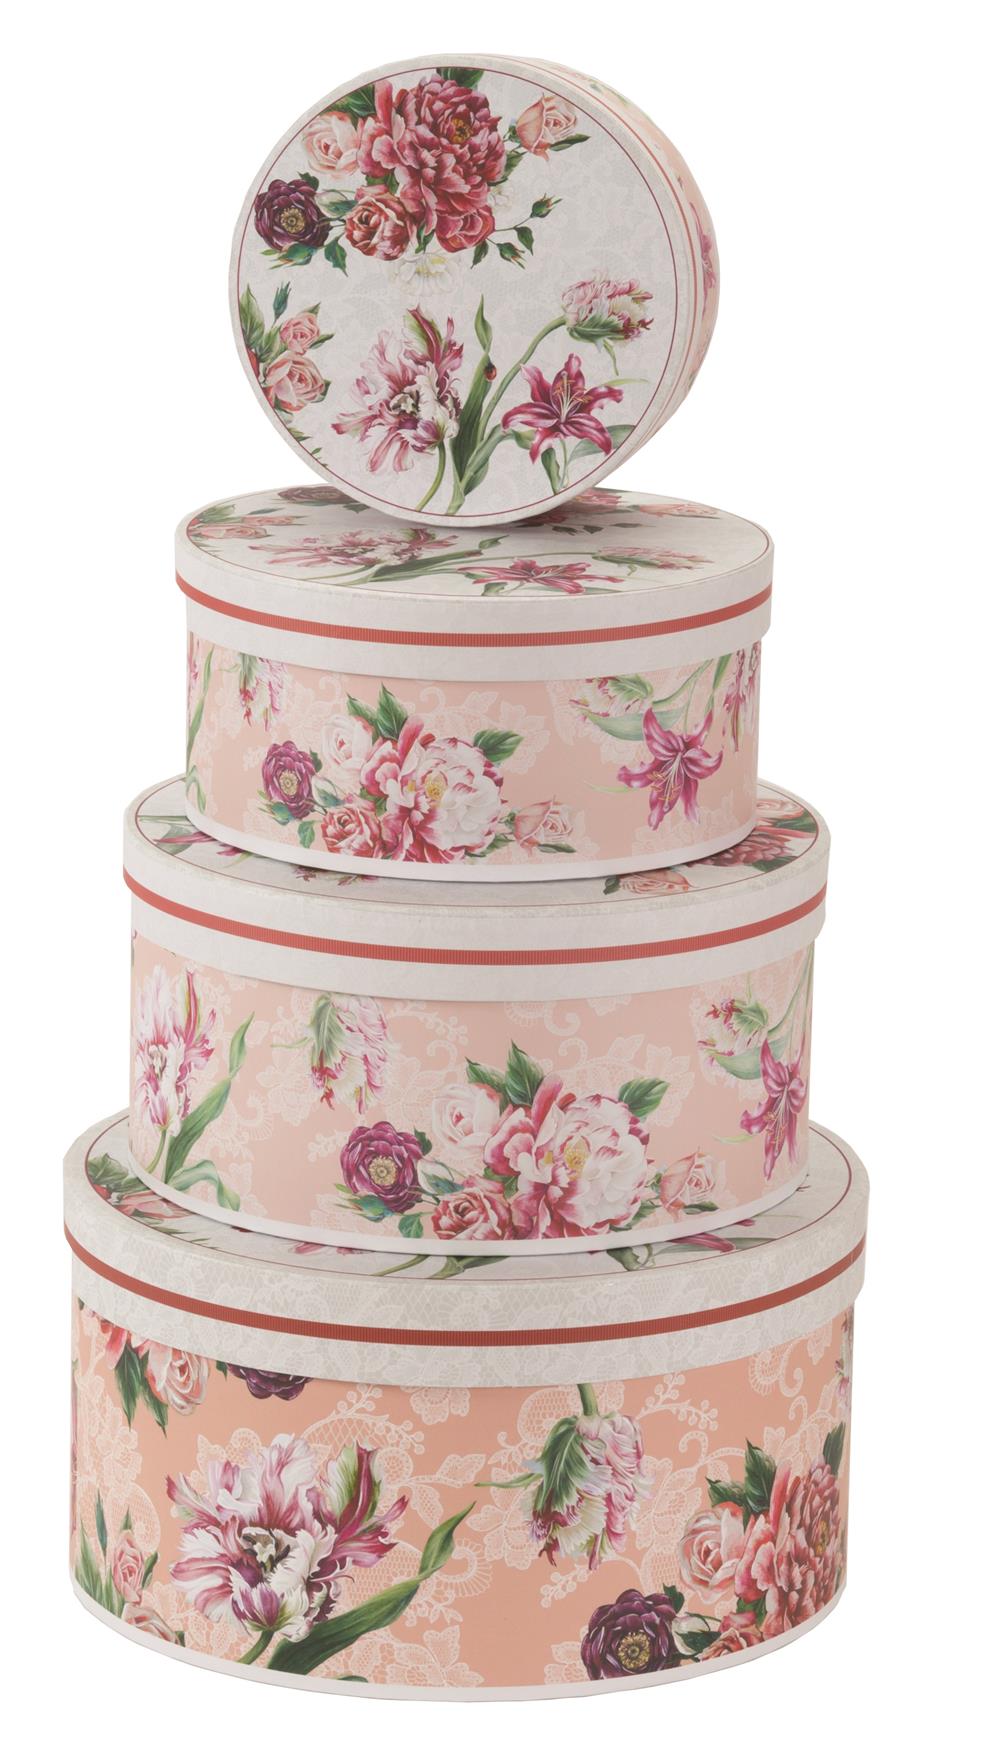 Pink floral bouquet cardboard storage boxes 2 Pack